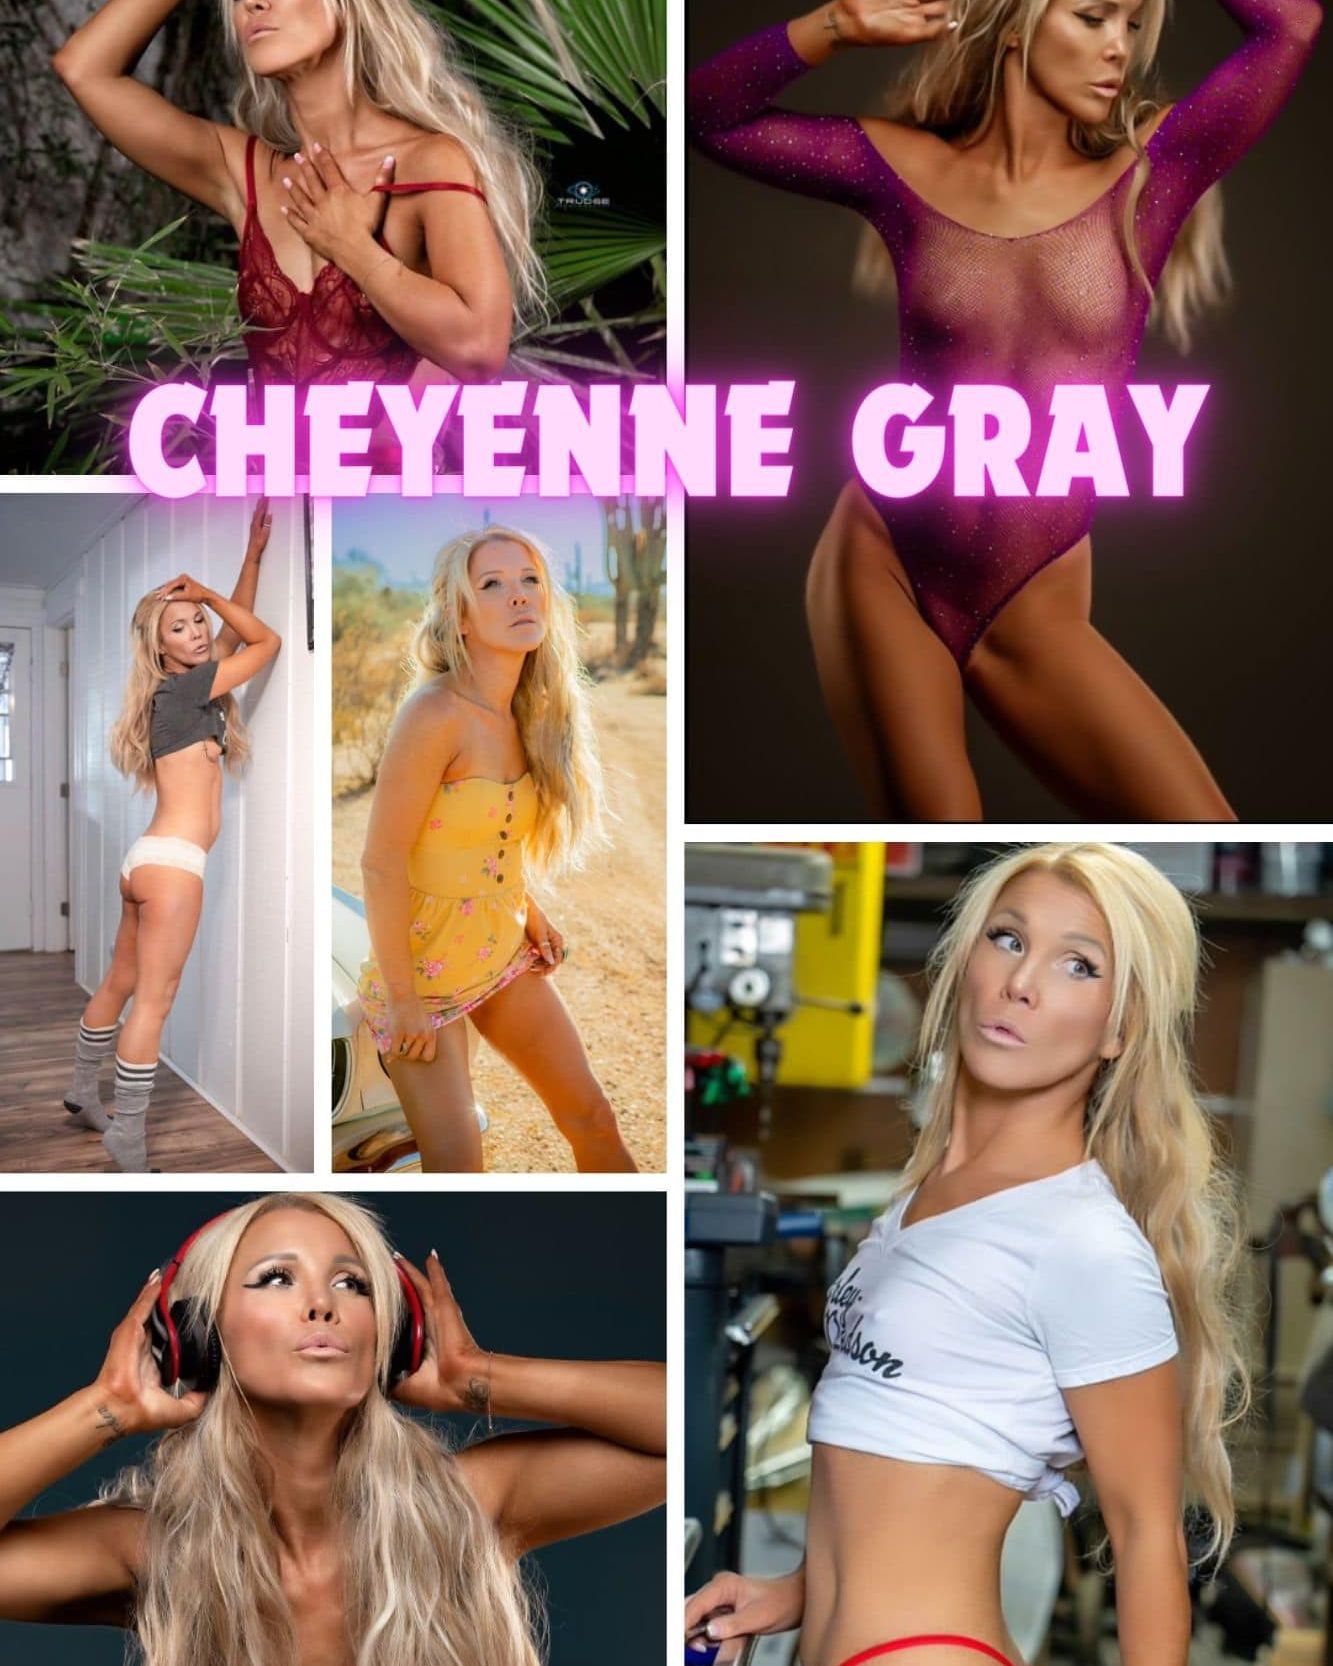 Hey y’all! Check out this new super beautiful MILF guest star Cheyenne Gray! She is completely exclusive to Ziva Fey’s Fantasies and has never been on video before. HURRY get your customs & pls be sure to catch the Cam show on my free OF (zivafeyxxx) TODAY May 6th 4-6pm AZ time 📷